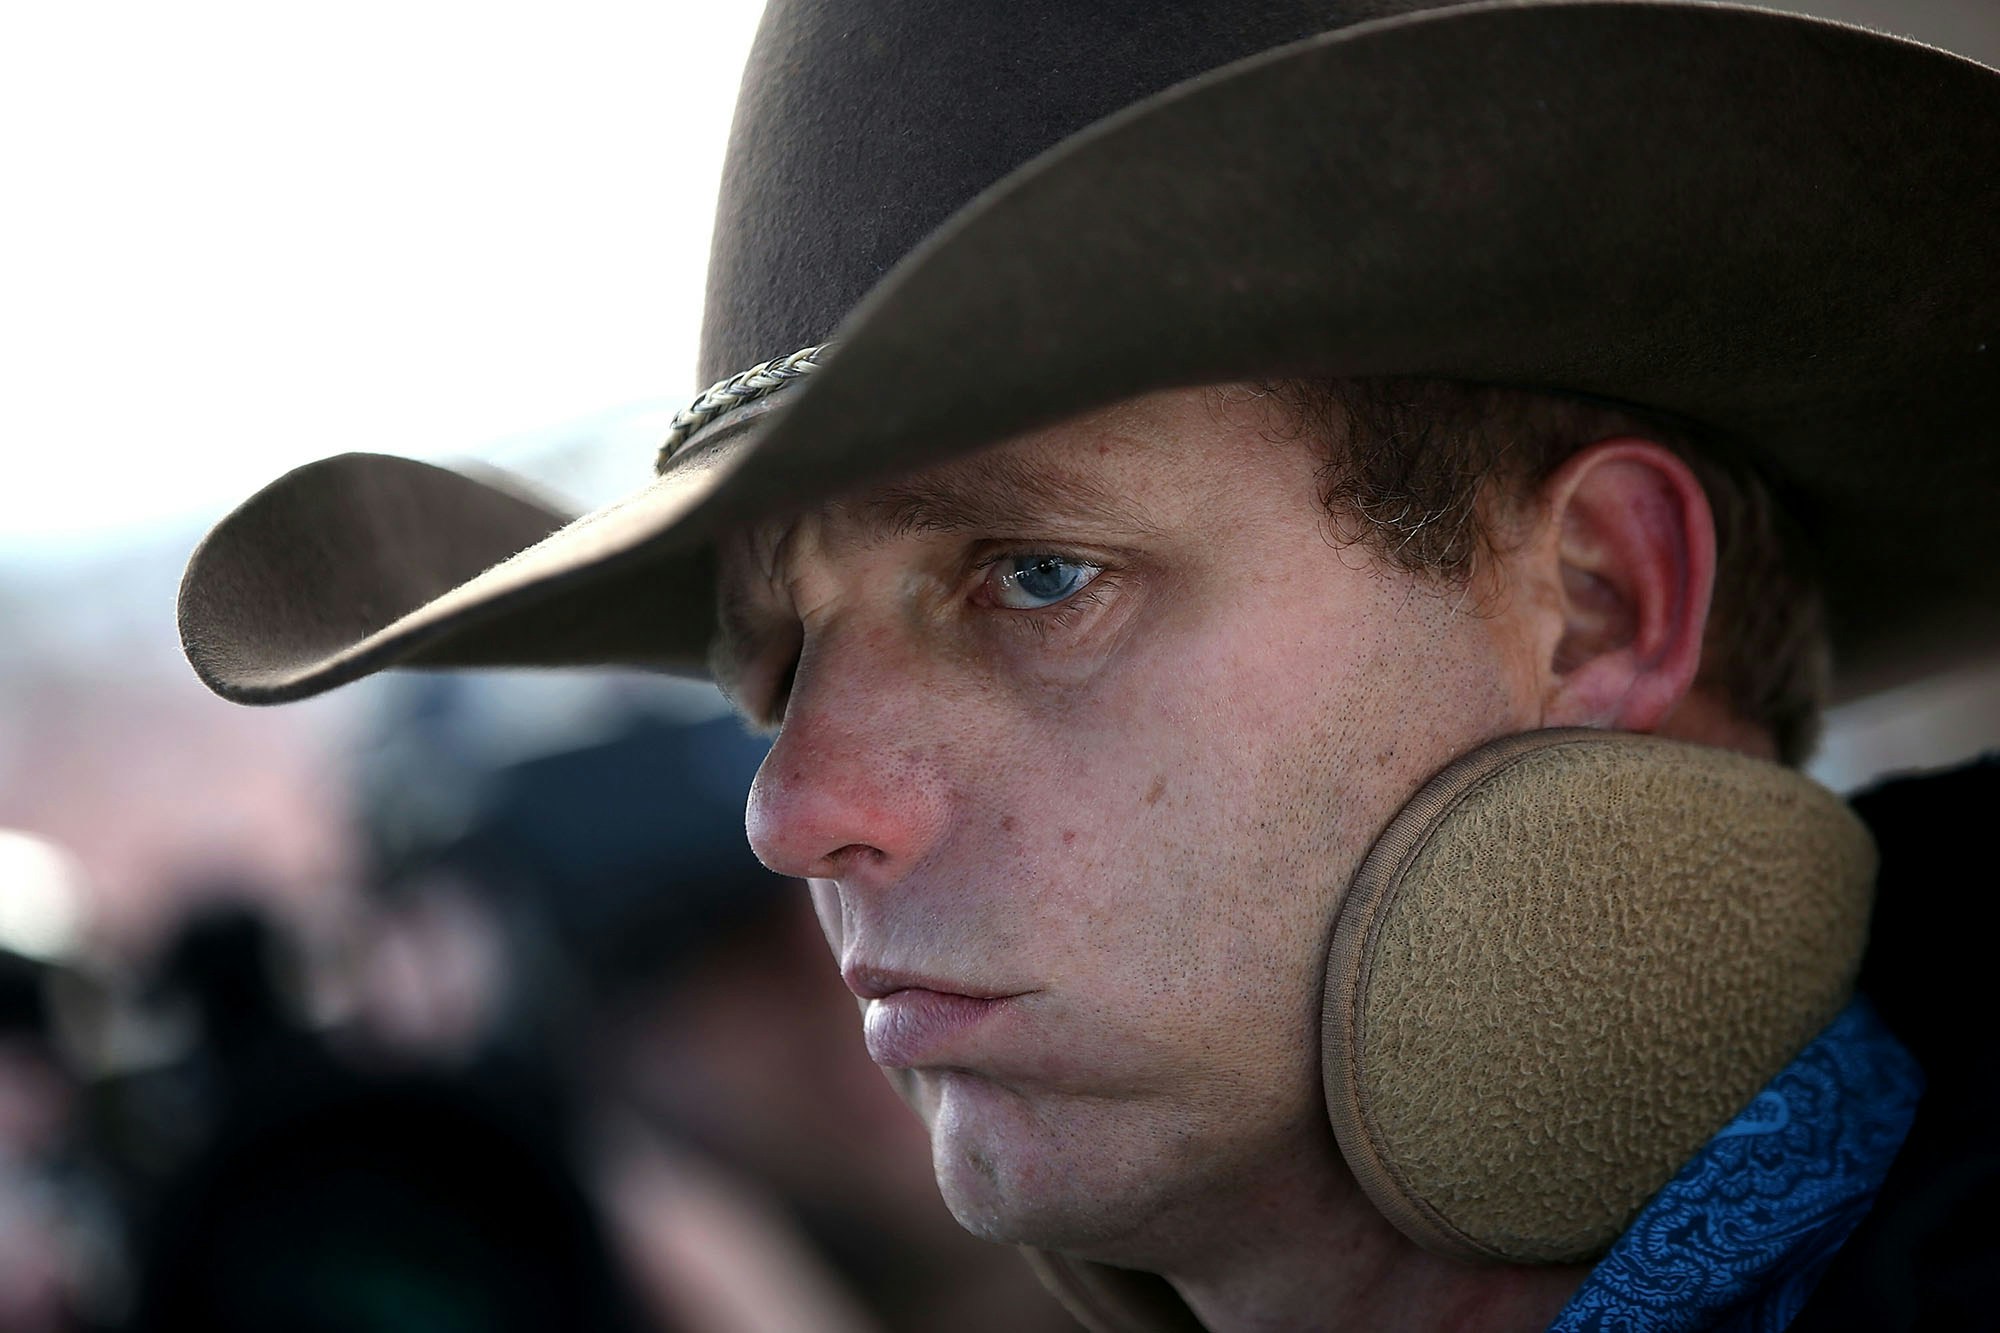 BURNS, OR - JANUARY 06:  Ryan Bundy, a member of an anti-government militia, speaks to members of the media in front of the Malheur National Wildlife Refuge Headquarters on January 6, 2016 near Burns, Oregon.  An armed anti-government militia group continues to occupy the Malheur National Wildlife Headquarters as they protest the jailing  of two ranchers for arson.  (Photo by Justin Sullivan/Getty Images)